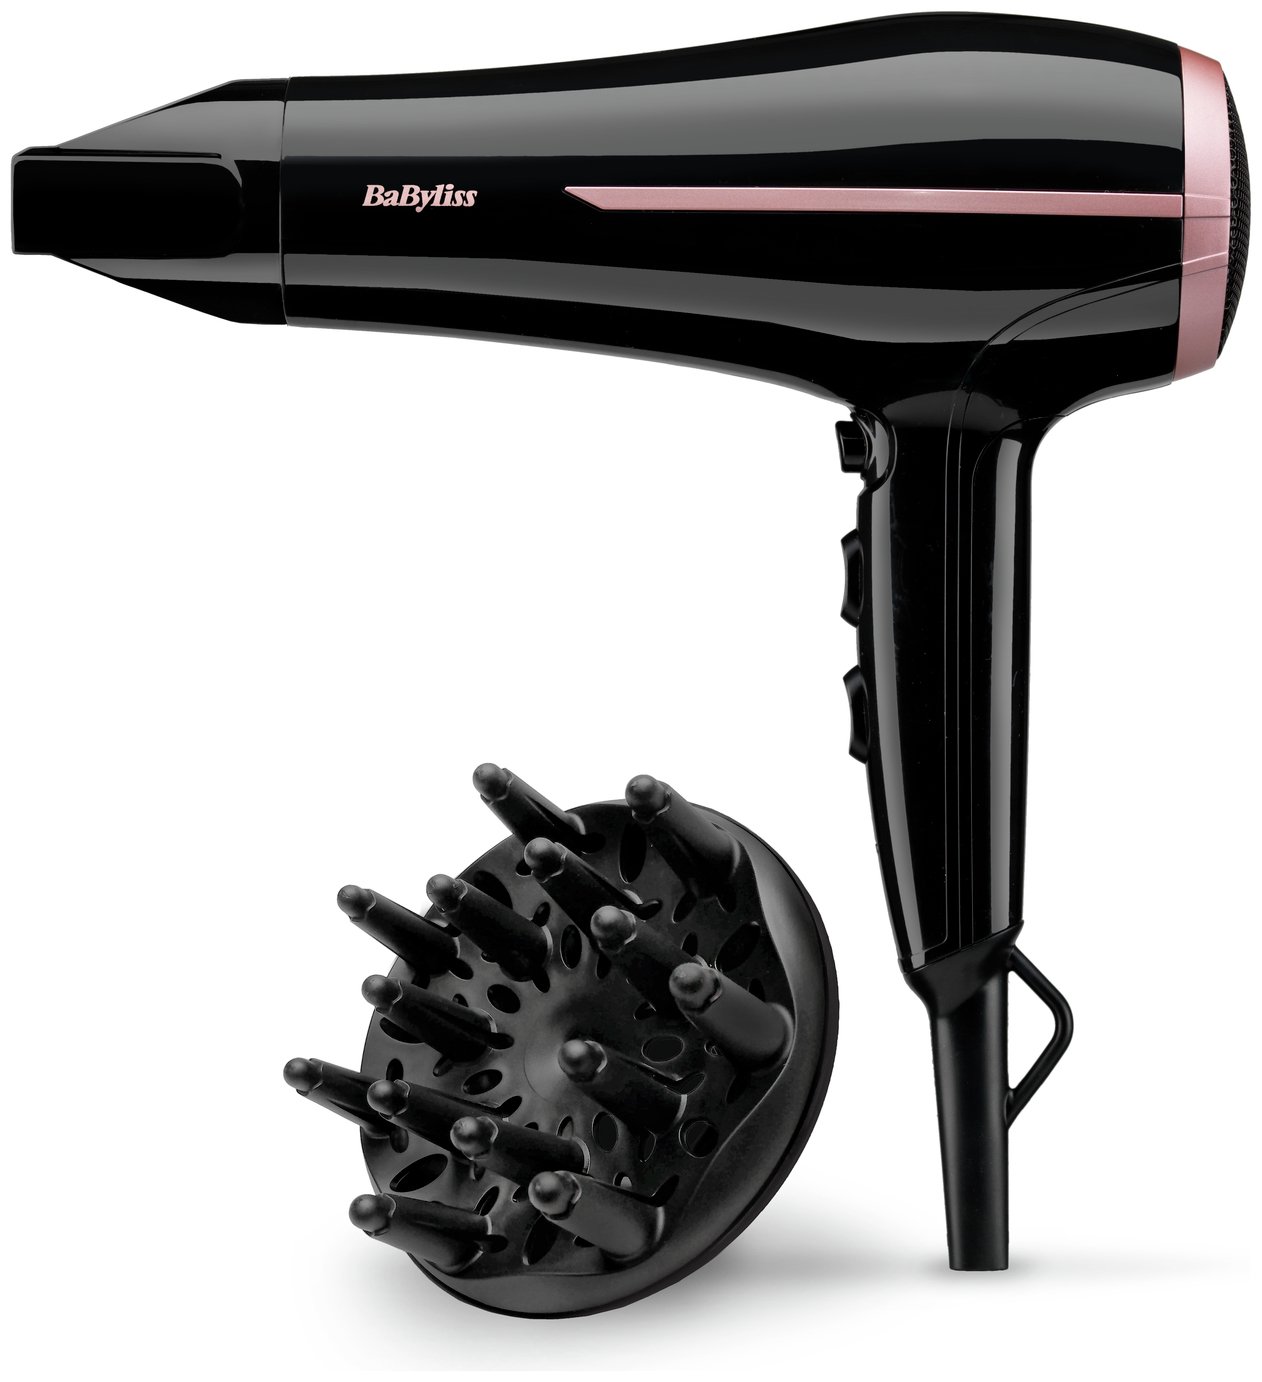 BaByliss Curl Dry Hair Dryer with Diffuser review